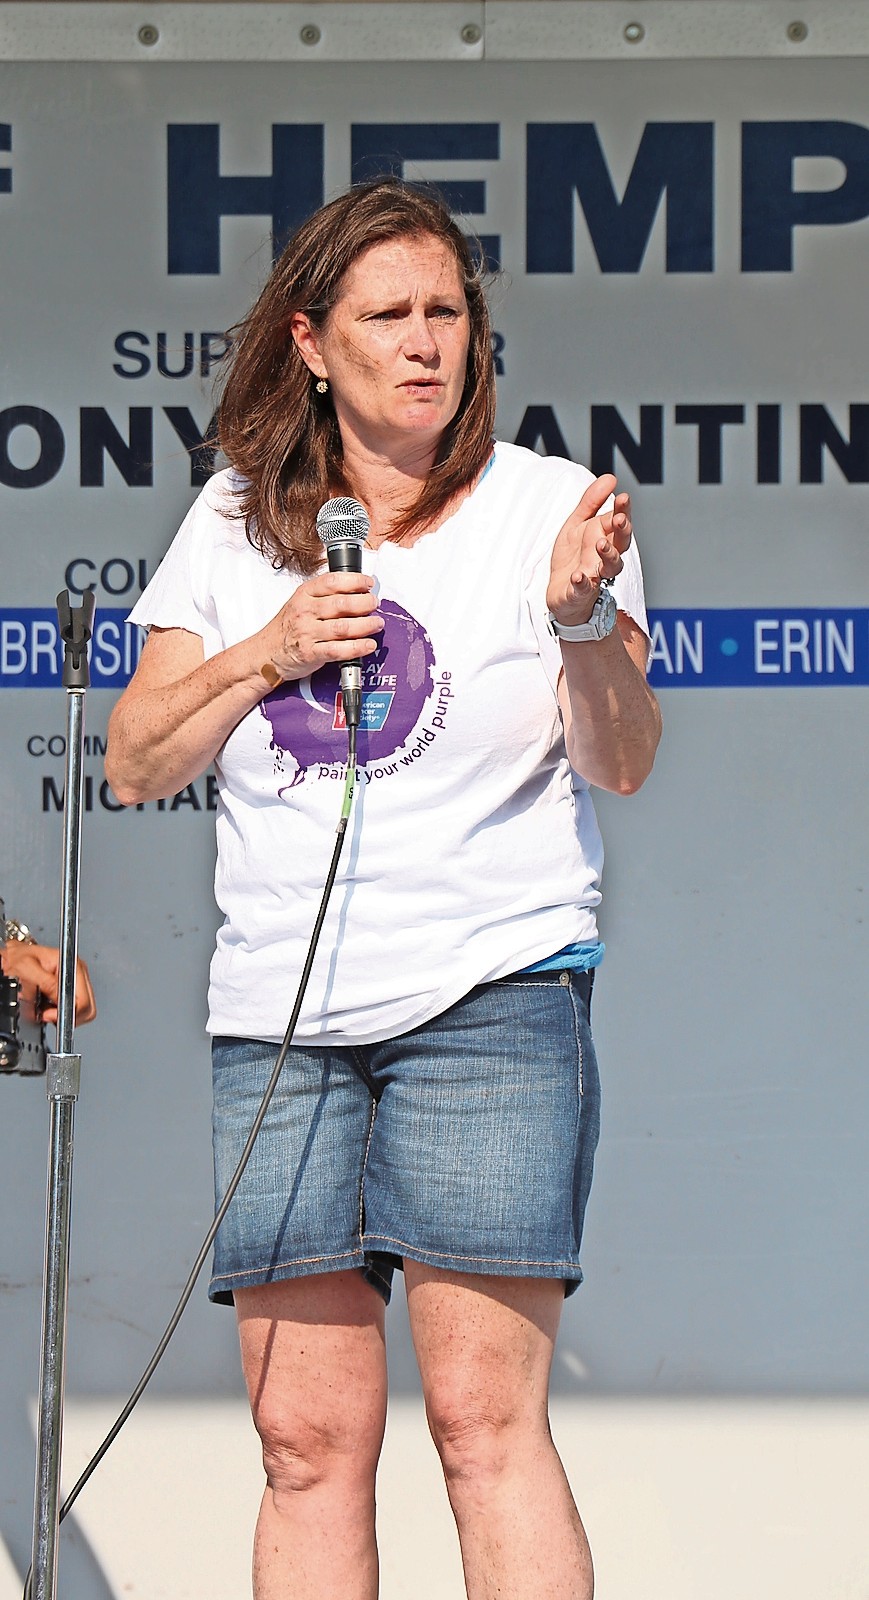 Terry Gough was the keynote speaker, who shared her story about surviving her battle with cancer at Seaford Relay for Life on June 11.